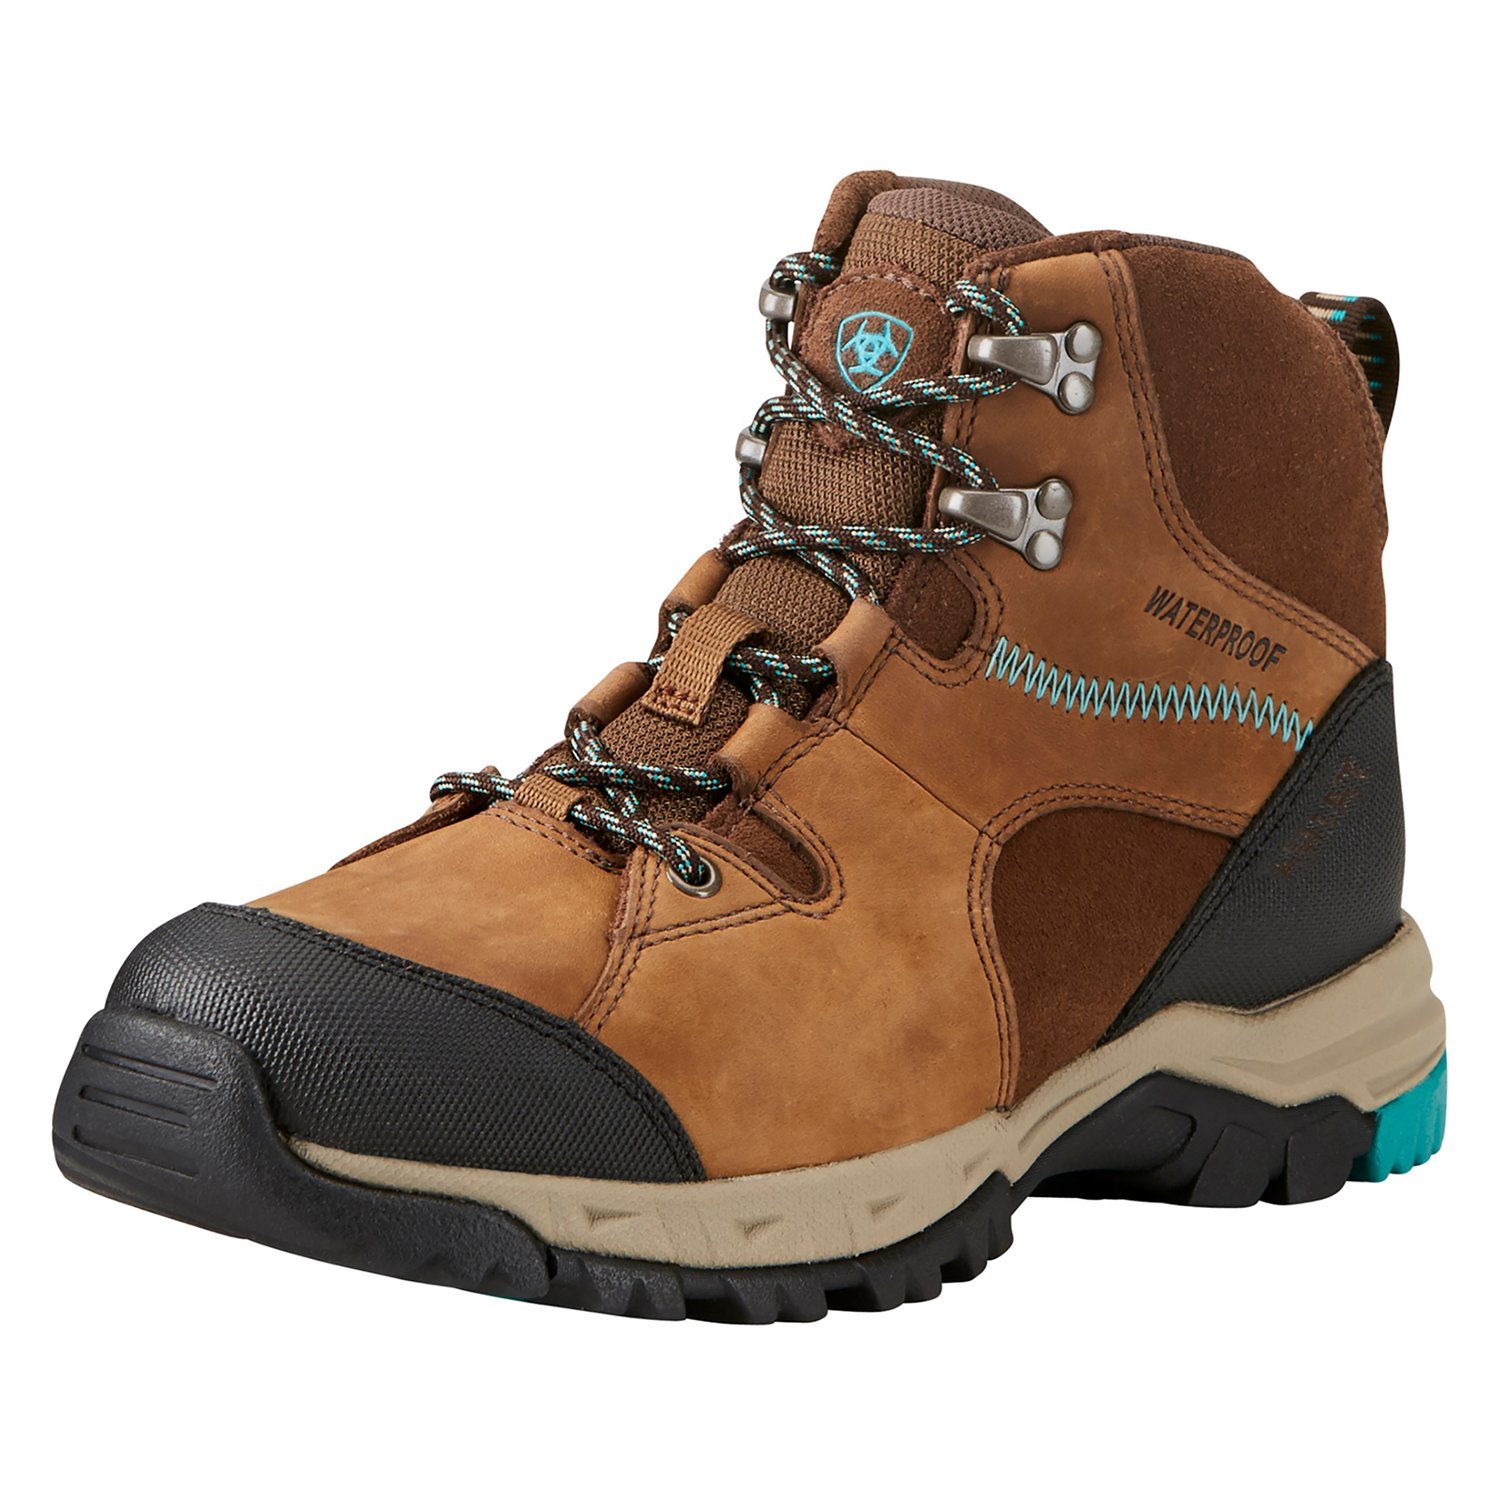 ARIAT Outdoorschuh Skyline Mid H2O distressed brown | 36